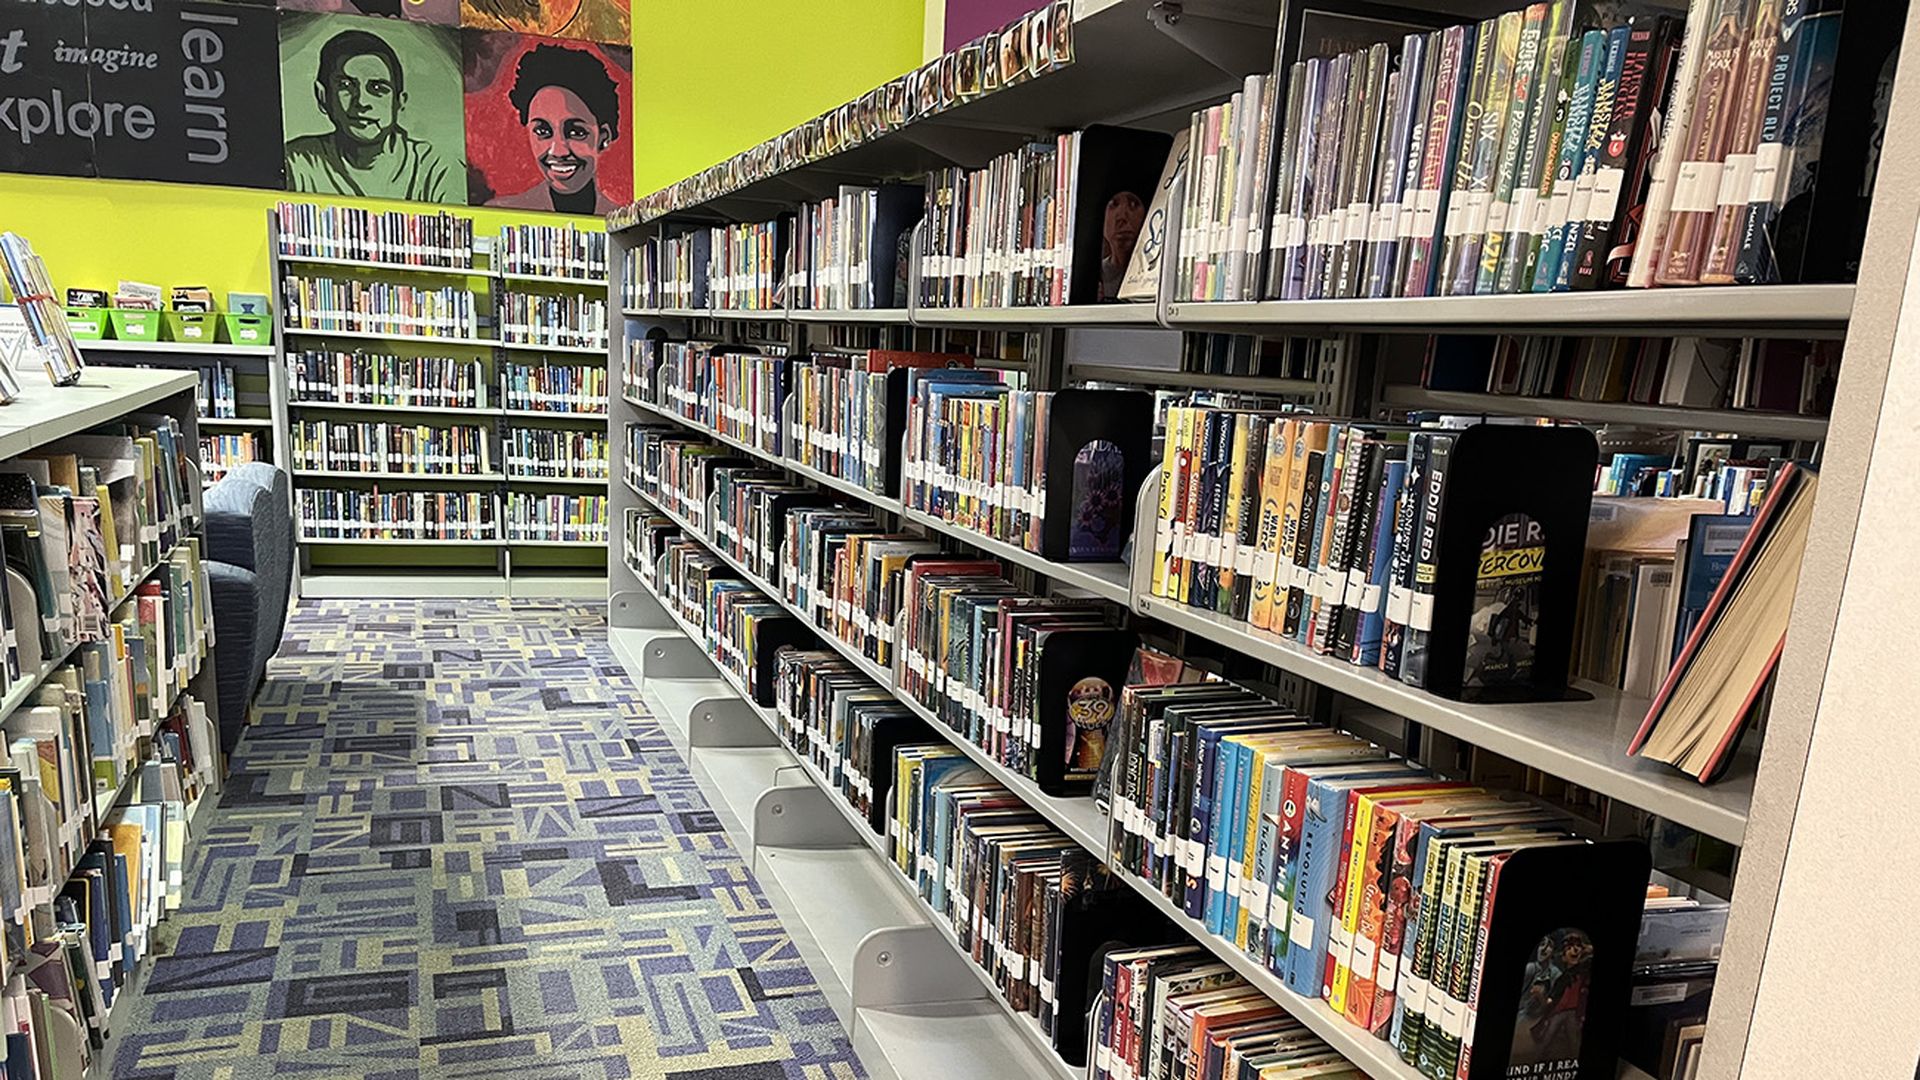 Rows of books at the Plaza Midwood branch of the Charlotte Mecklenburg Library. Photo: Danielle Chemtob/Axios